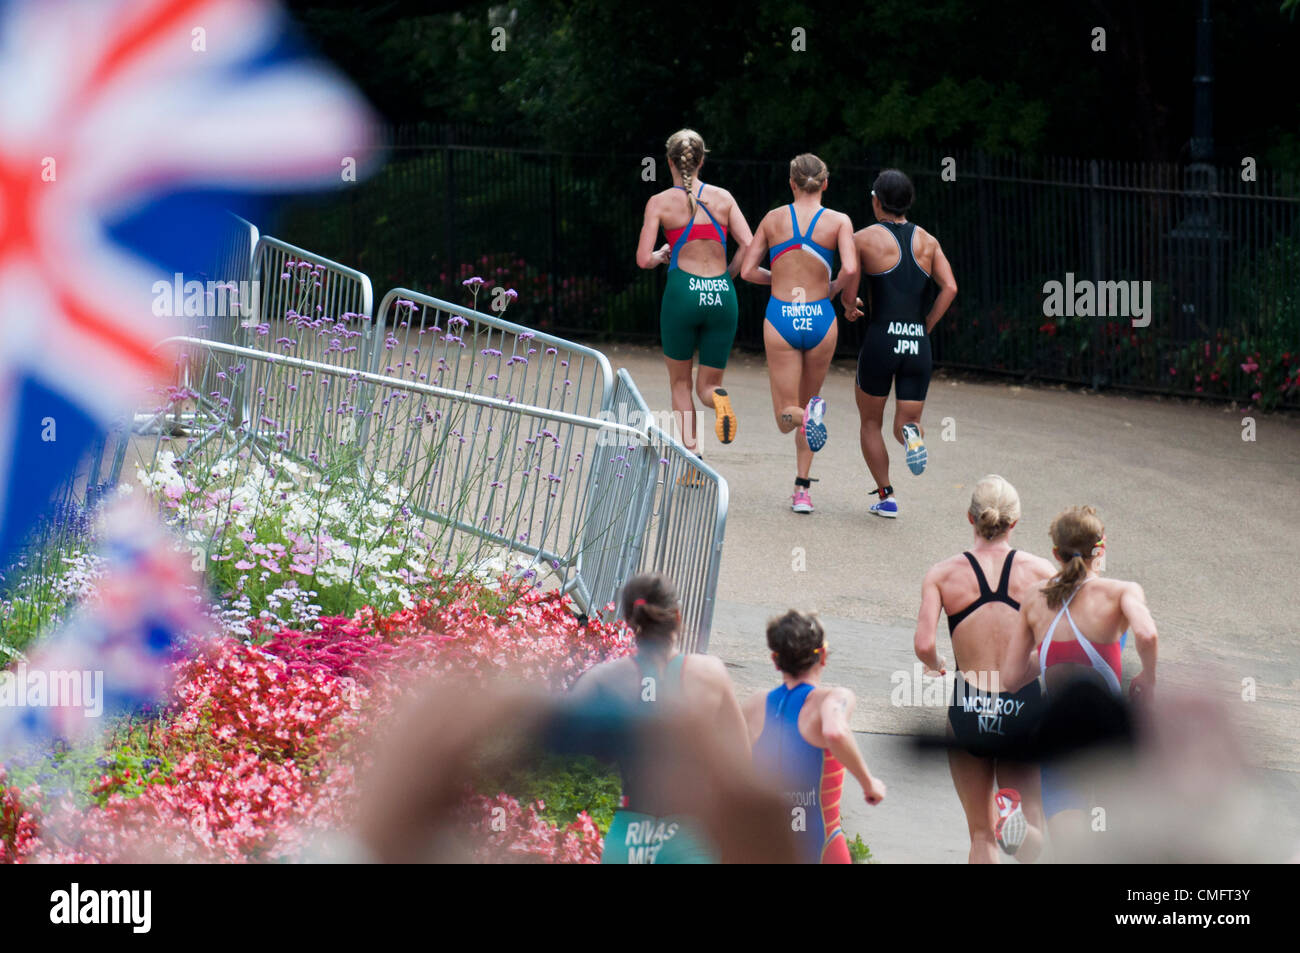 London, UK, Saturday 4th August 2012.  The chase group of the women's triathlon, including lead by South Africa's Gillian Sanders, run up a hill in London's Hyde Park in the final 10k run of the race. The race was finally won by Switzerland's Nicola Spirig, picking up gold, with Sweden's Lisa Norden placing second and the silver medal and Australia's Erin Densham placing third and the bronze. Stock Photo